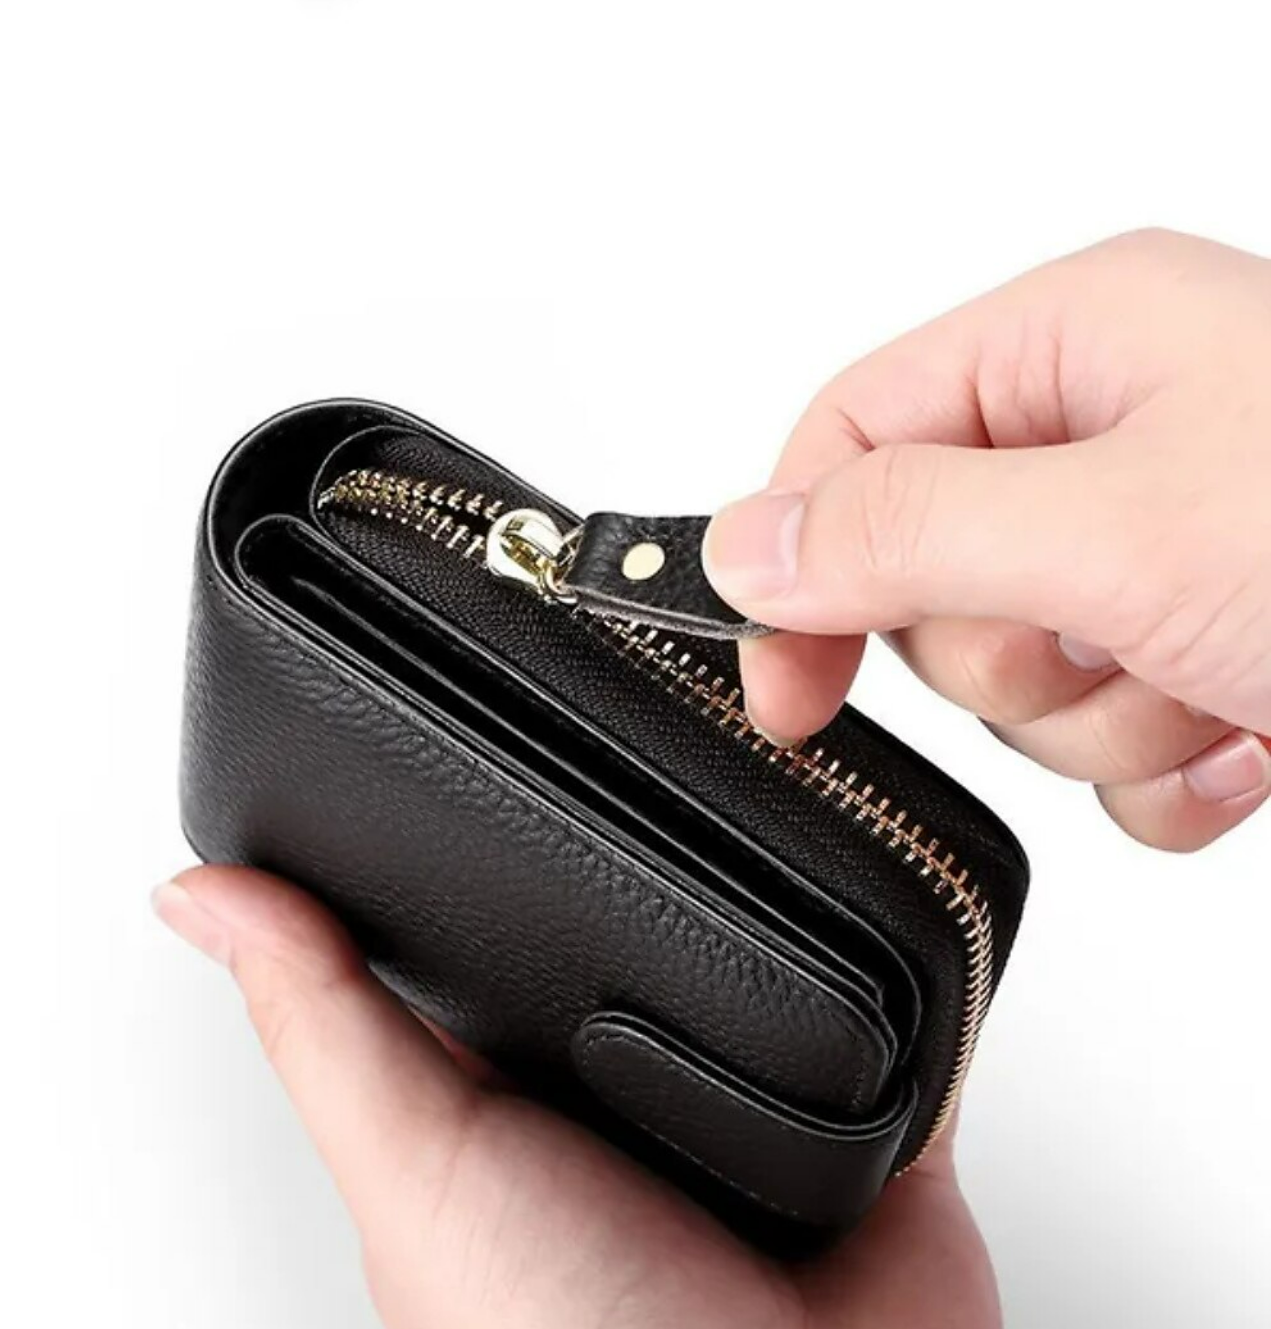 Rfid Credit Card Holder 16 Card Slots Wallet Genuine Leather Driver License ID Card Holder Walet Credit Card Case with Magnetic Shut Single Compartment for Women Men